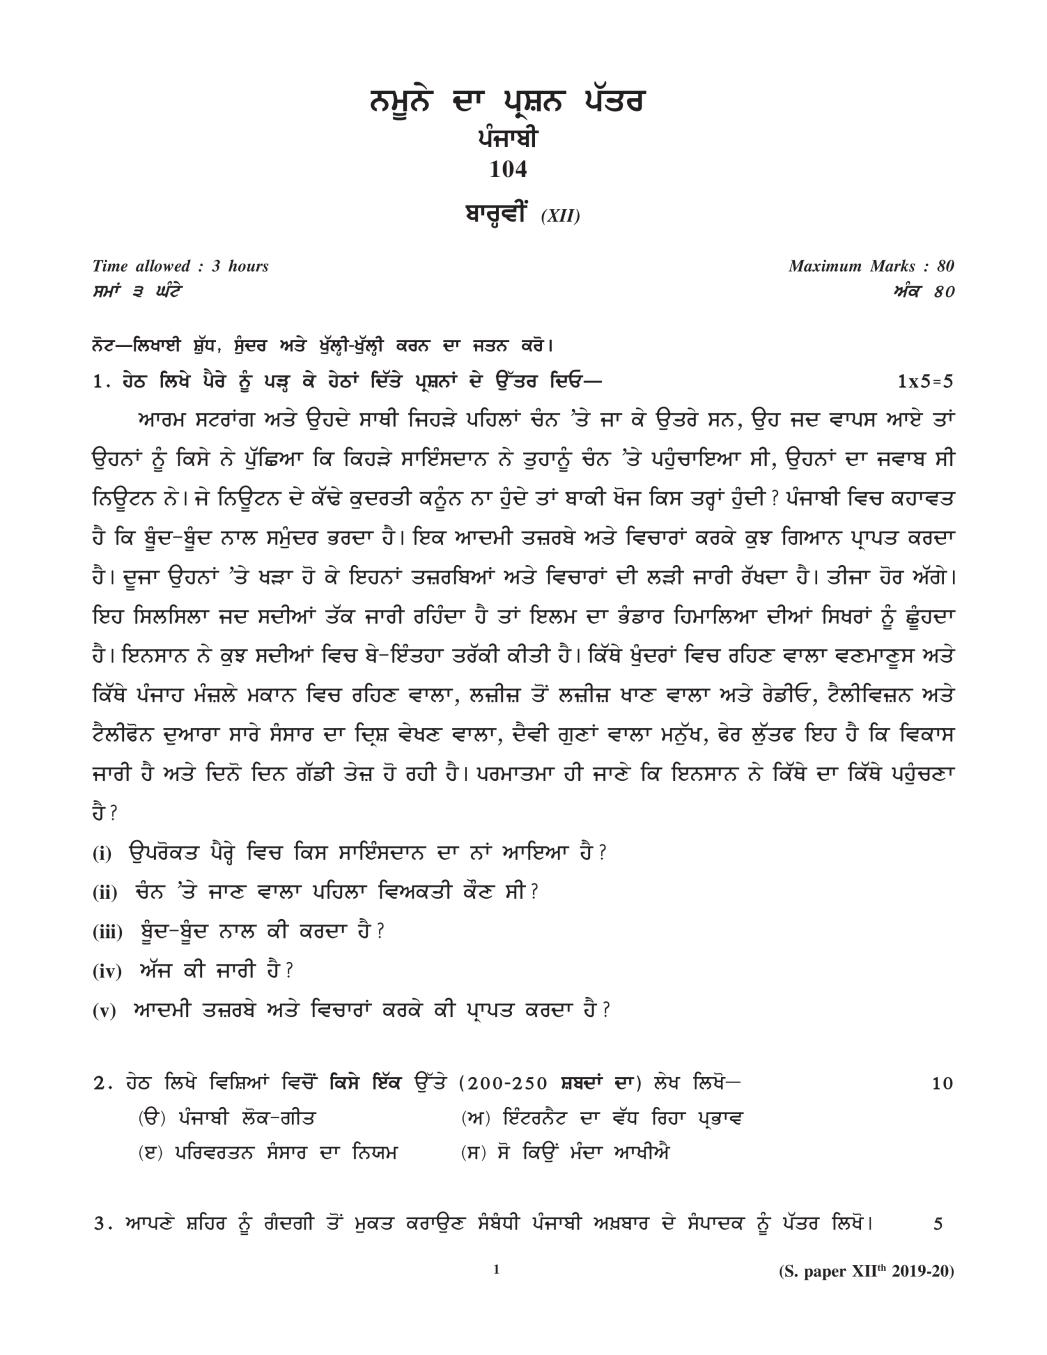 CBSE Class 12 Sample Paper 2020 for Punjabi - Page 1